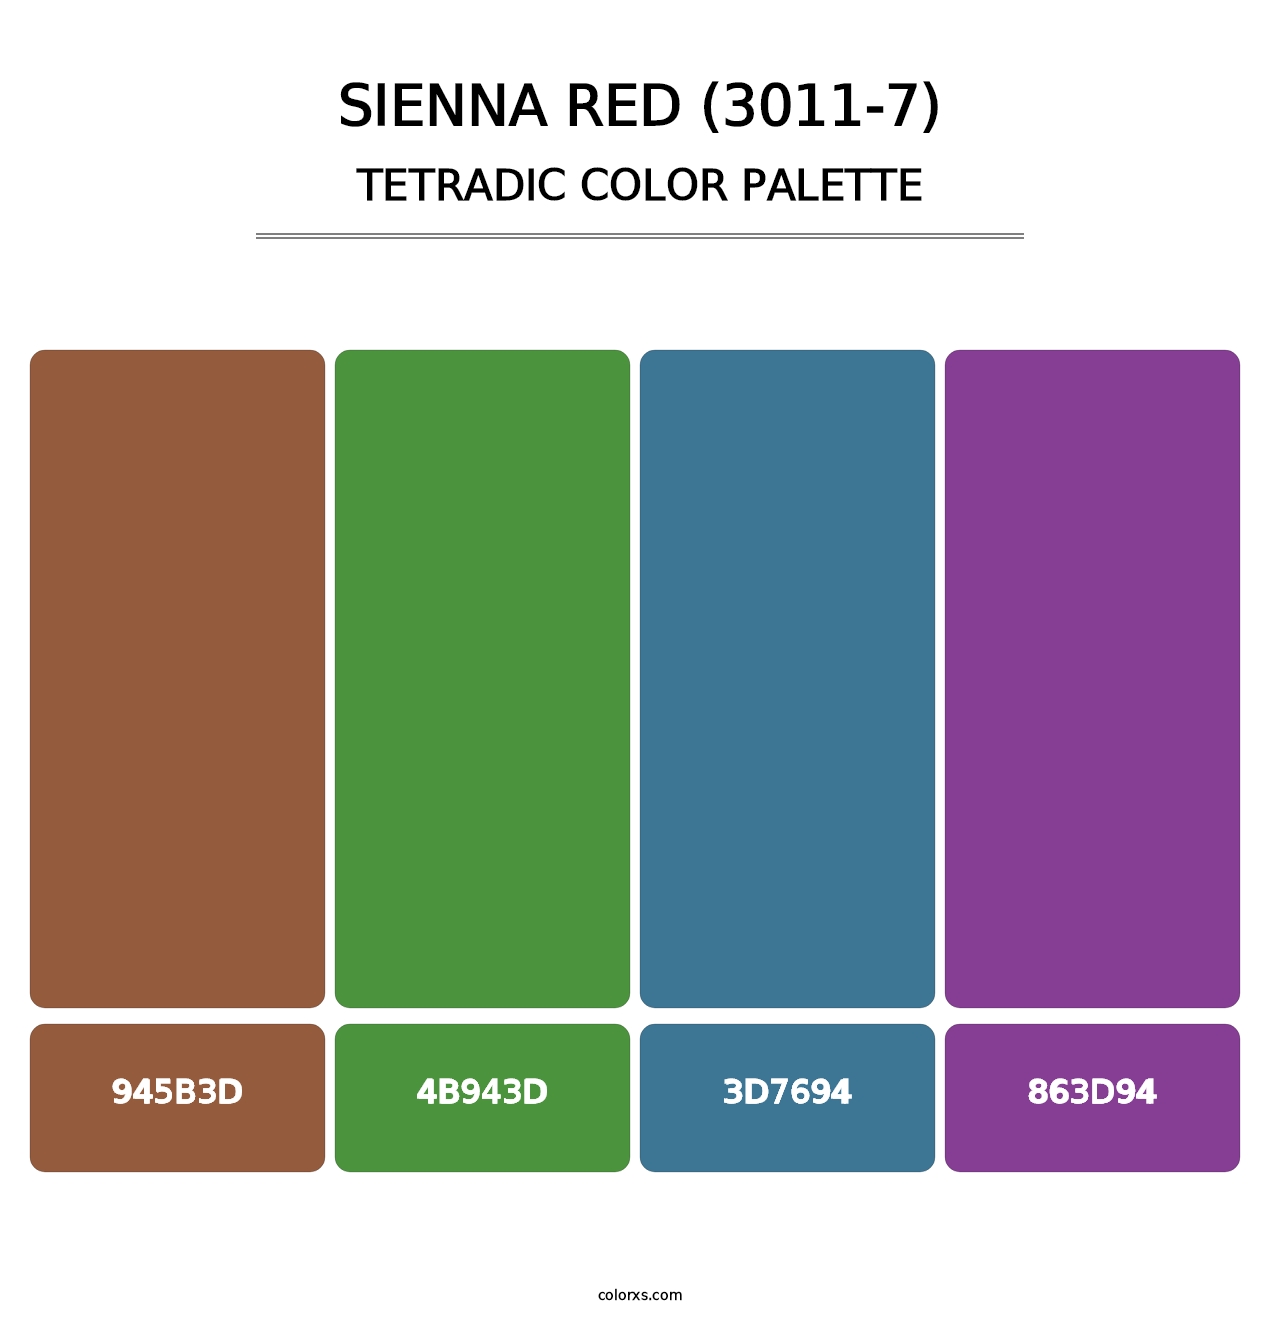 Sienna Red (3011-7) - Tetradic Color Palette